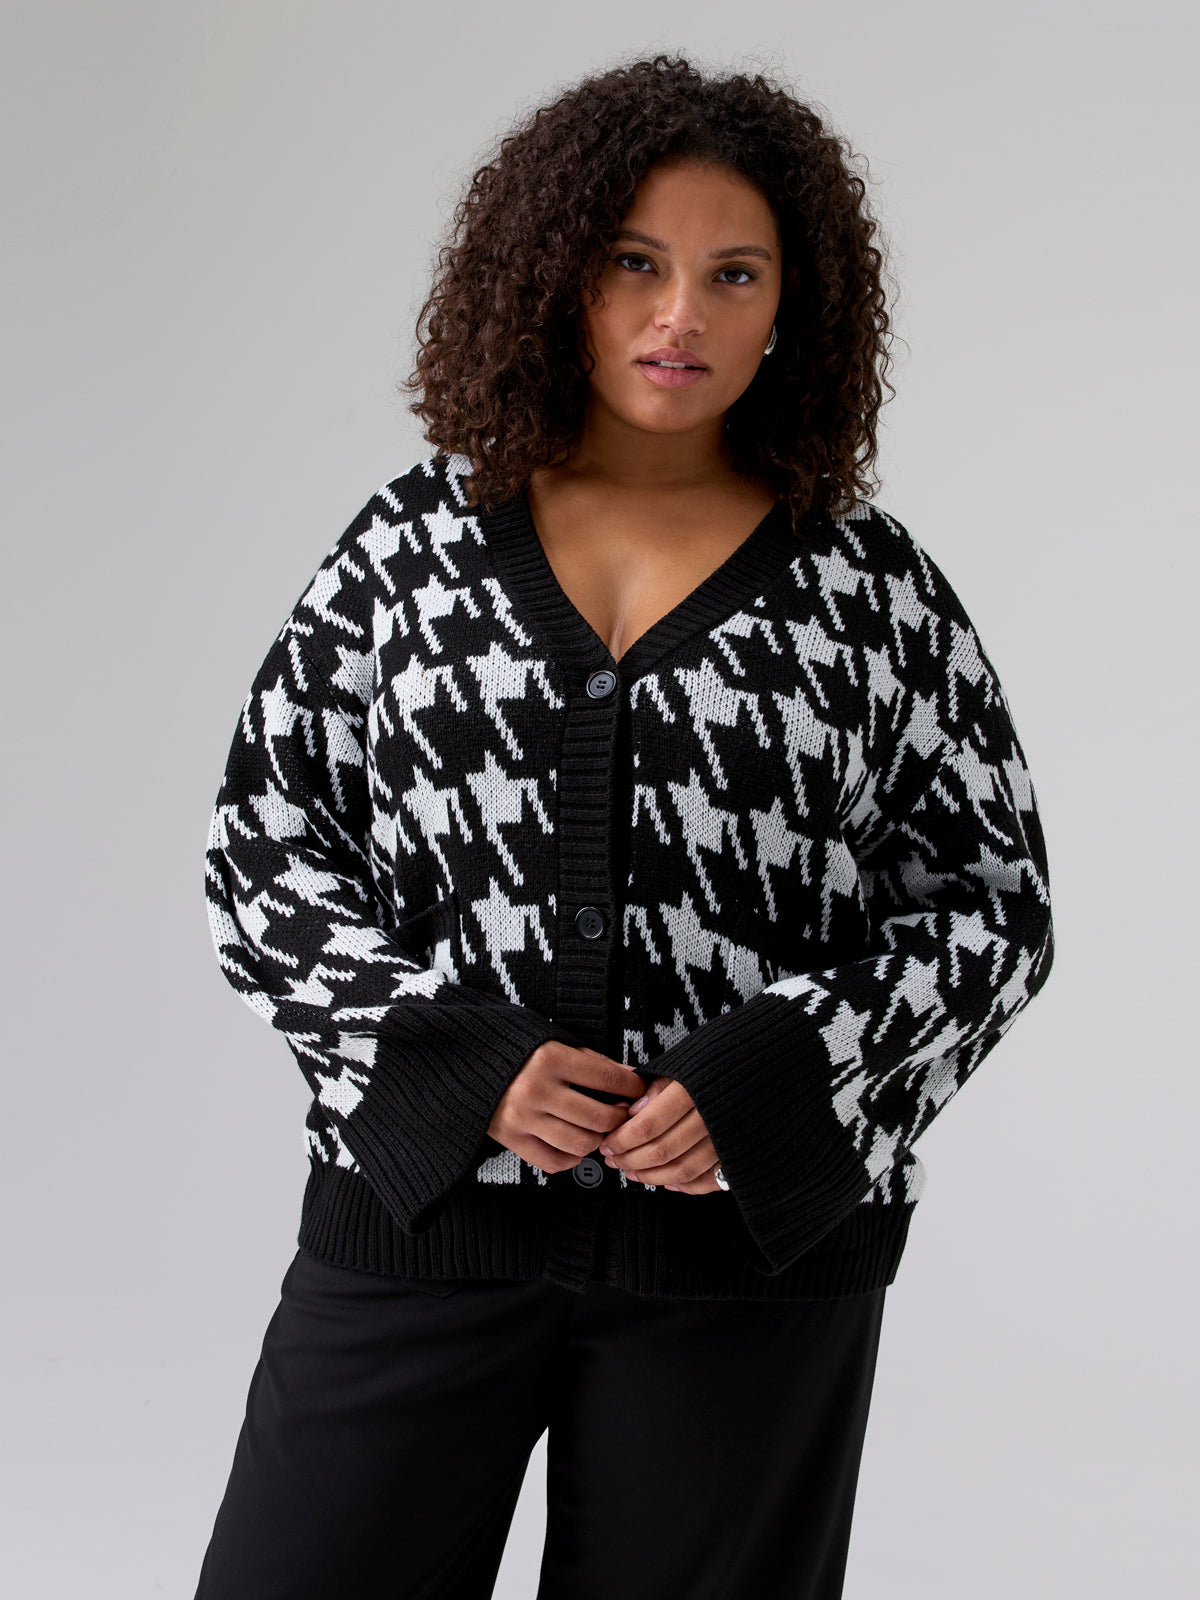 Warms My Heart Cardi Pulse Houndstooth Inclusive Collection